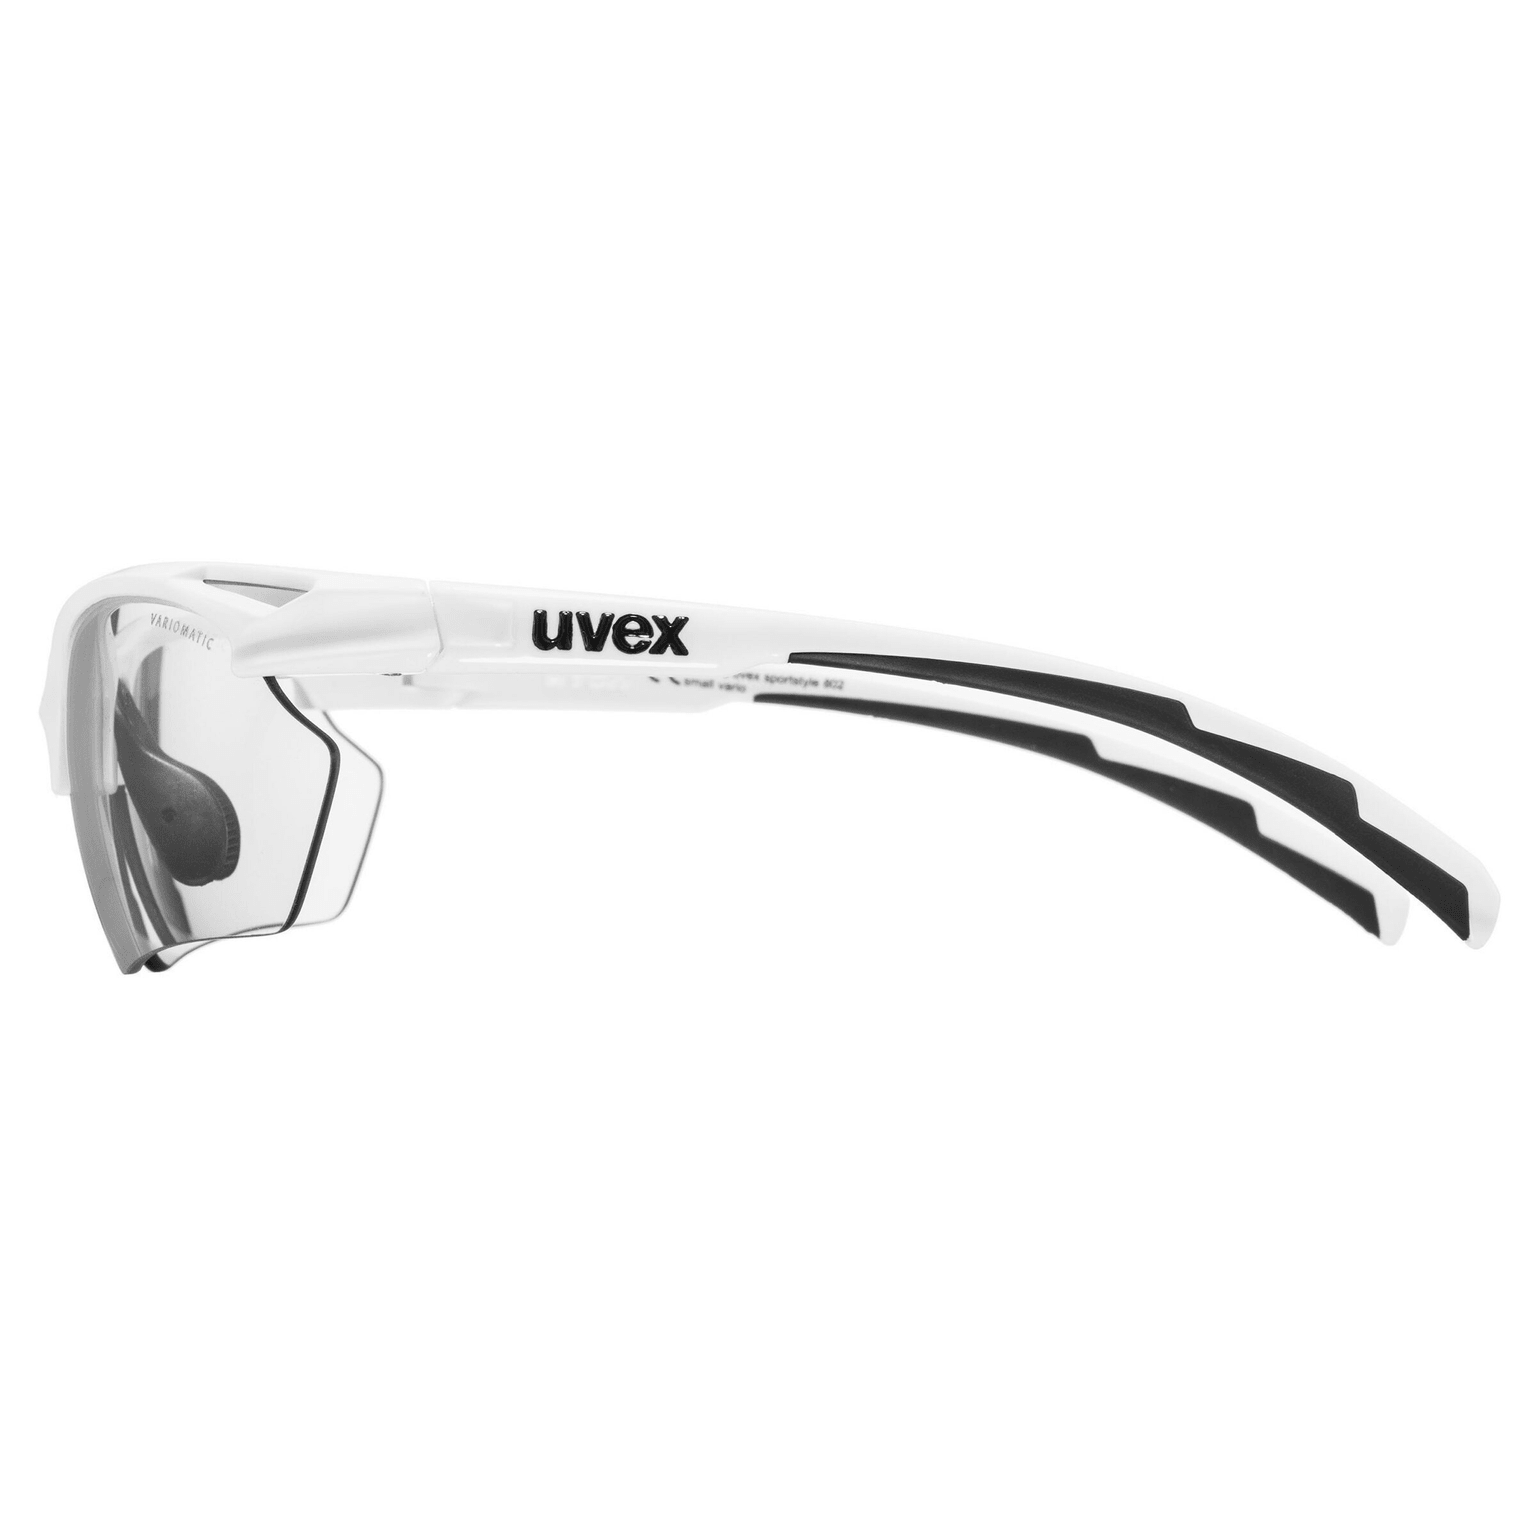 Uvex Uvex Sportstyle 802 V small Sportbrille weiss 3